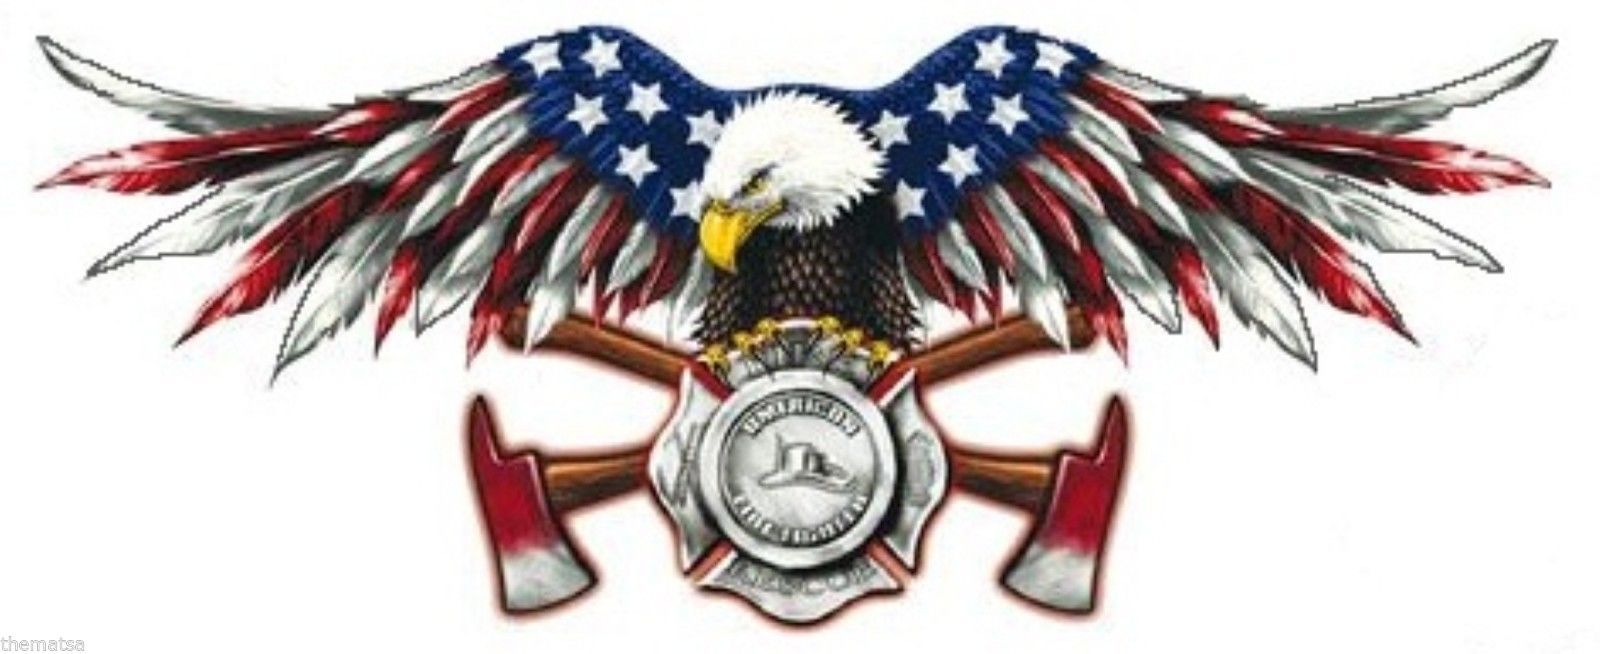 Primary image for AMERICAN FIREFIGHTER FIRE EAGLE HELMET LAPTOP  MADE IN USA  DECAL STICKER